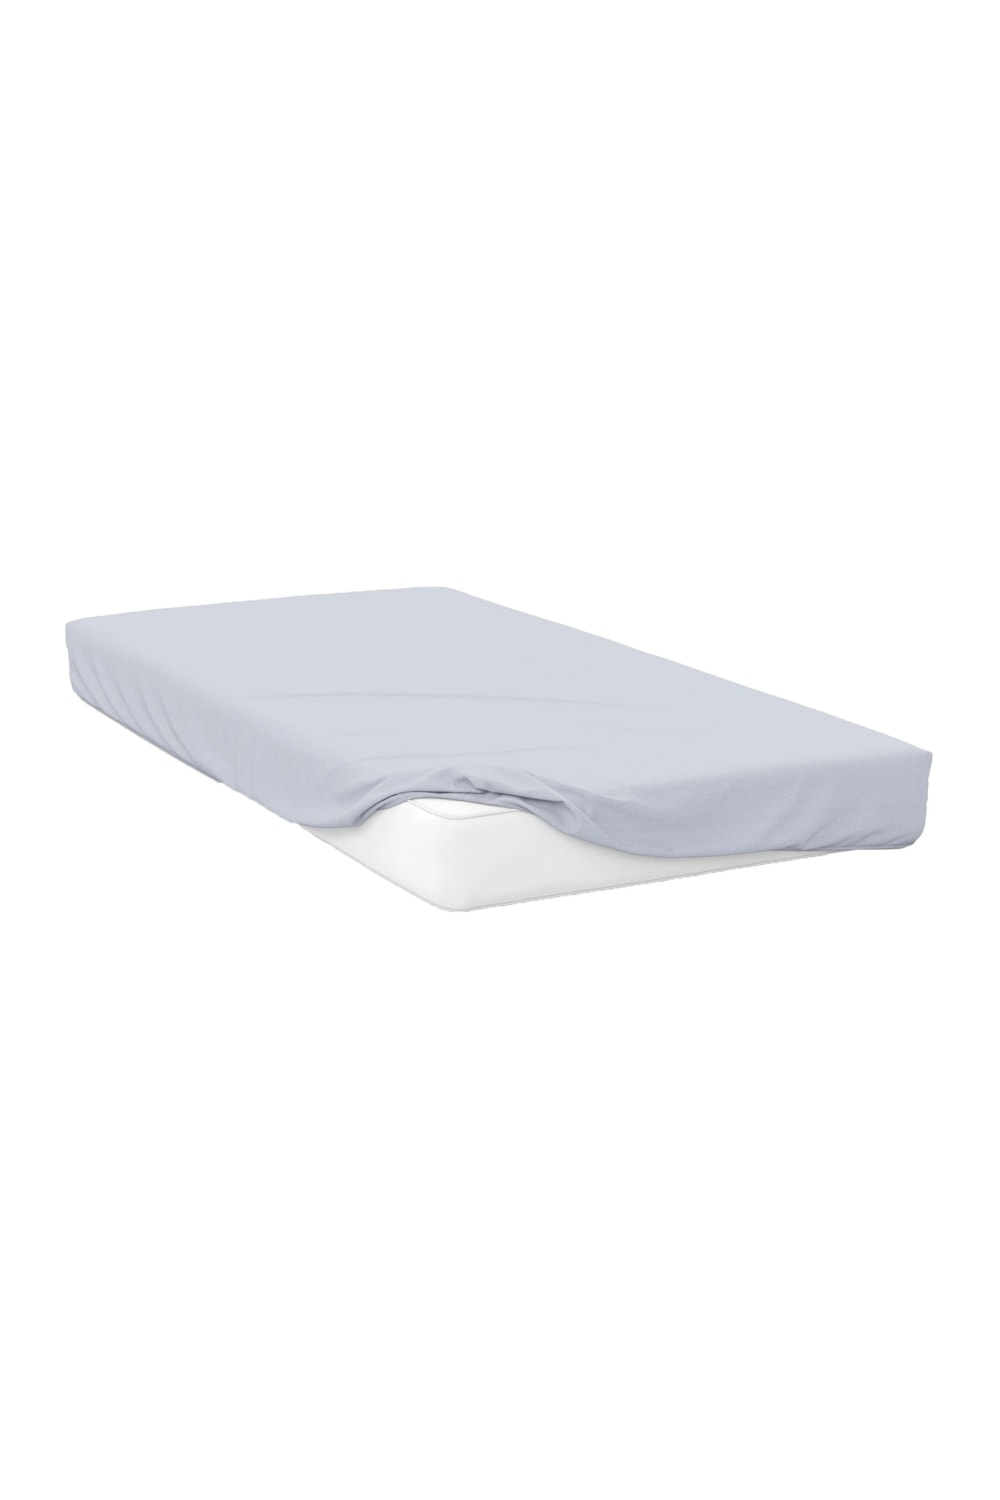 Belledorm 200 Thread Count Egyptian Cotton Fitted Sheet (Ocean) (Twin) (UK - Single)